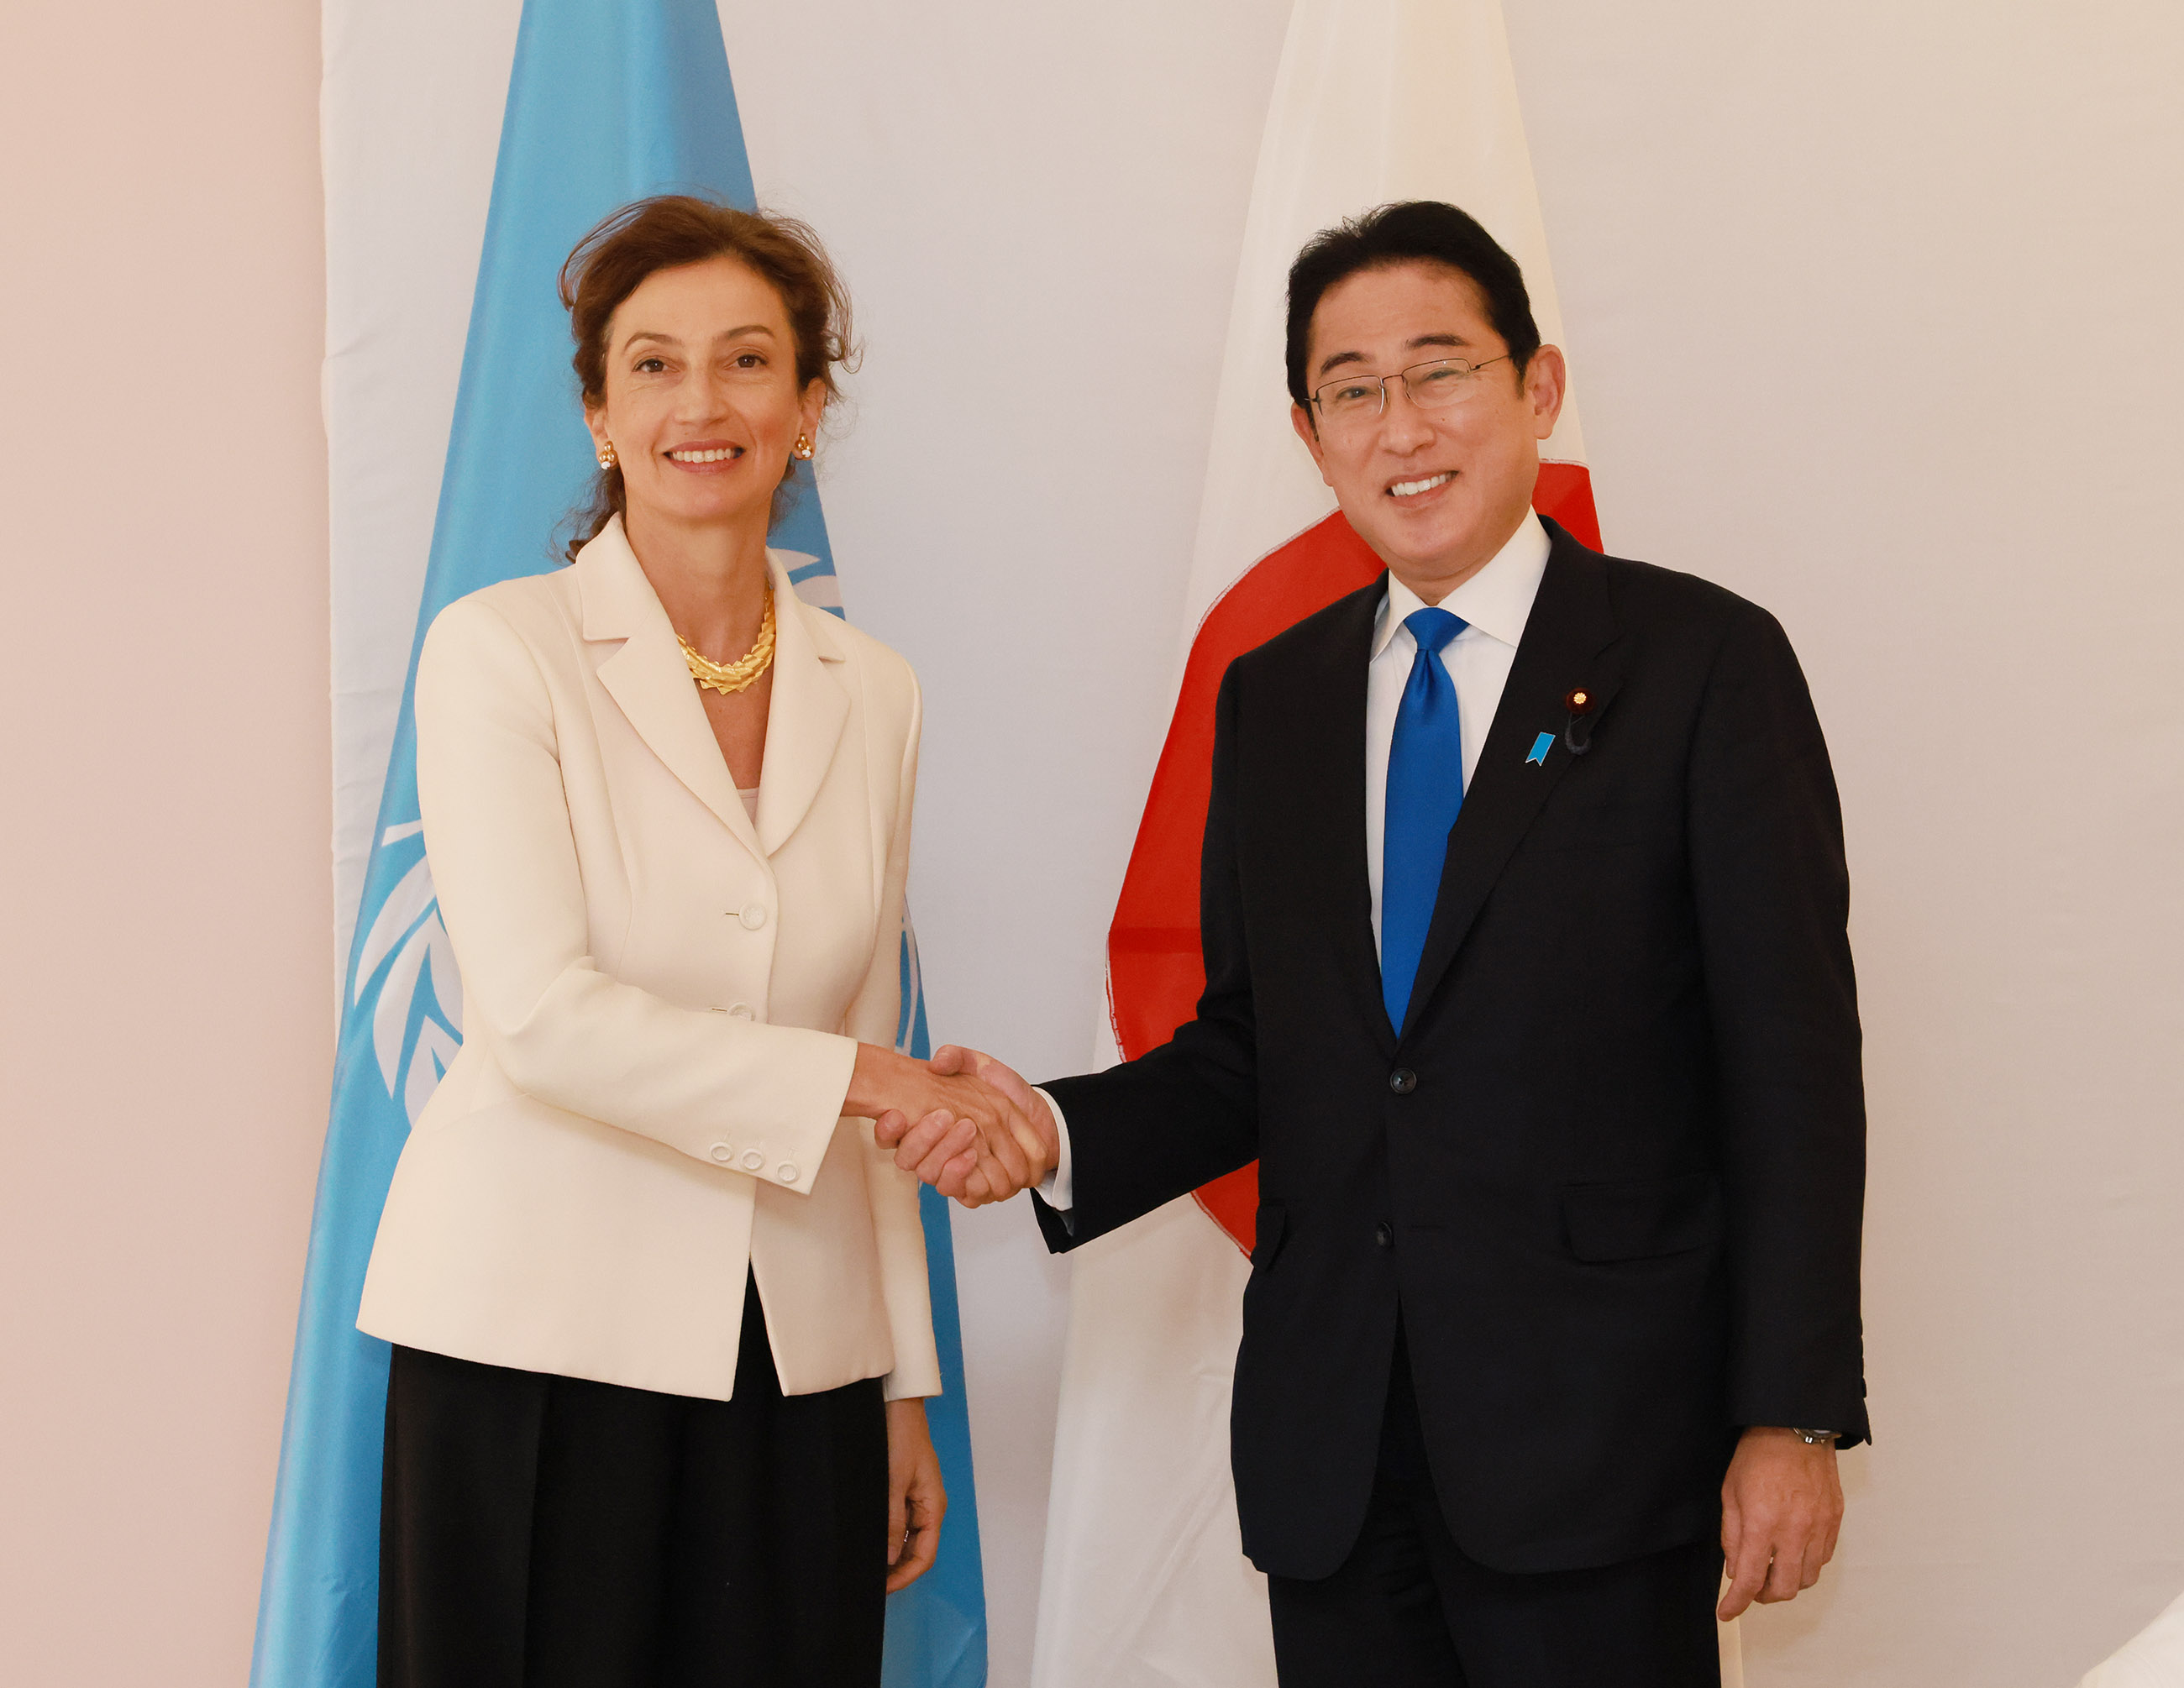 Prime Minister Kishida receiving a courtesy call from Director-General Azoulay of UNESCO